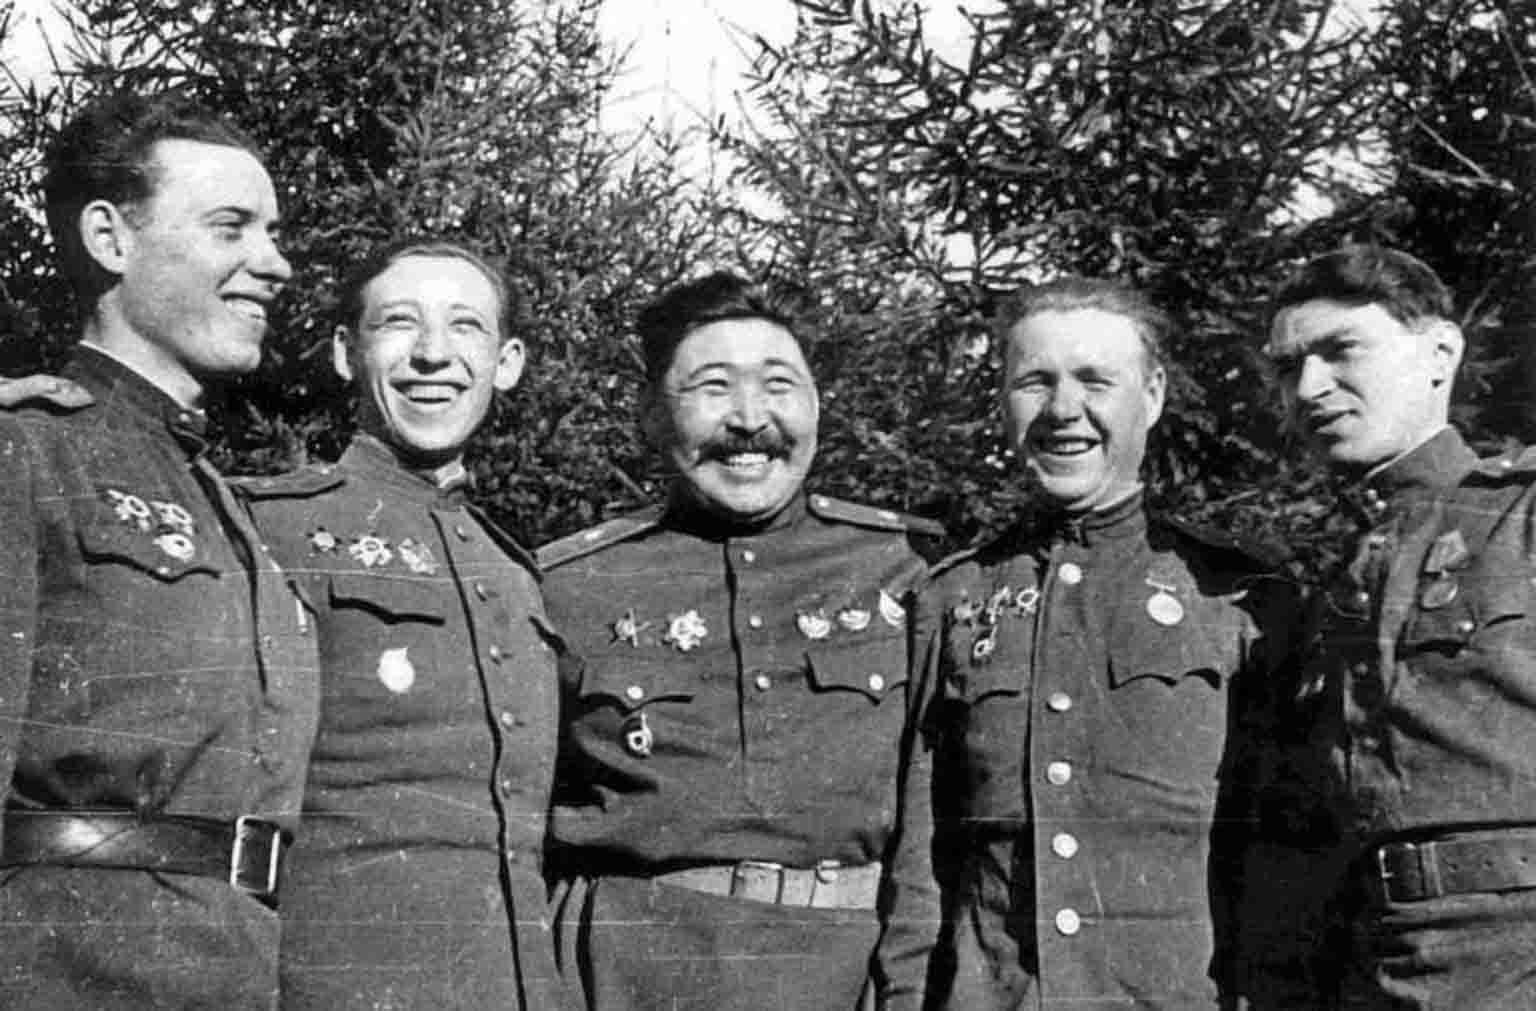 Heroes of the Soviet Union